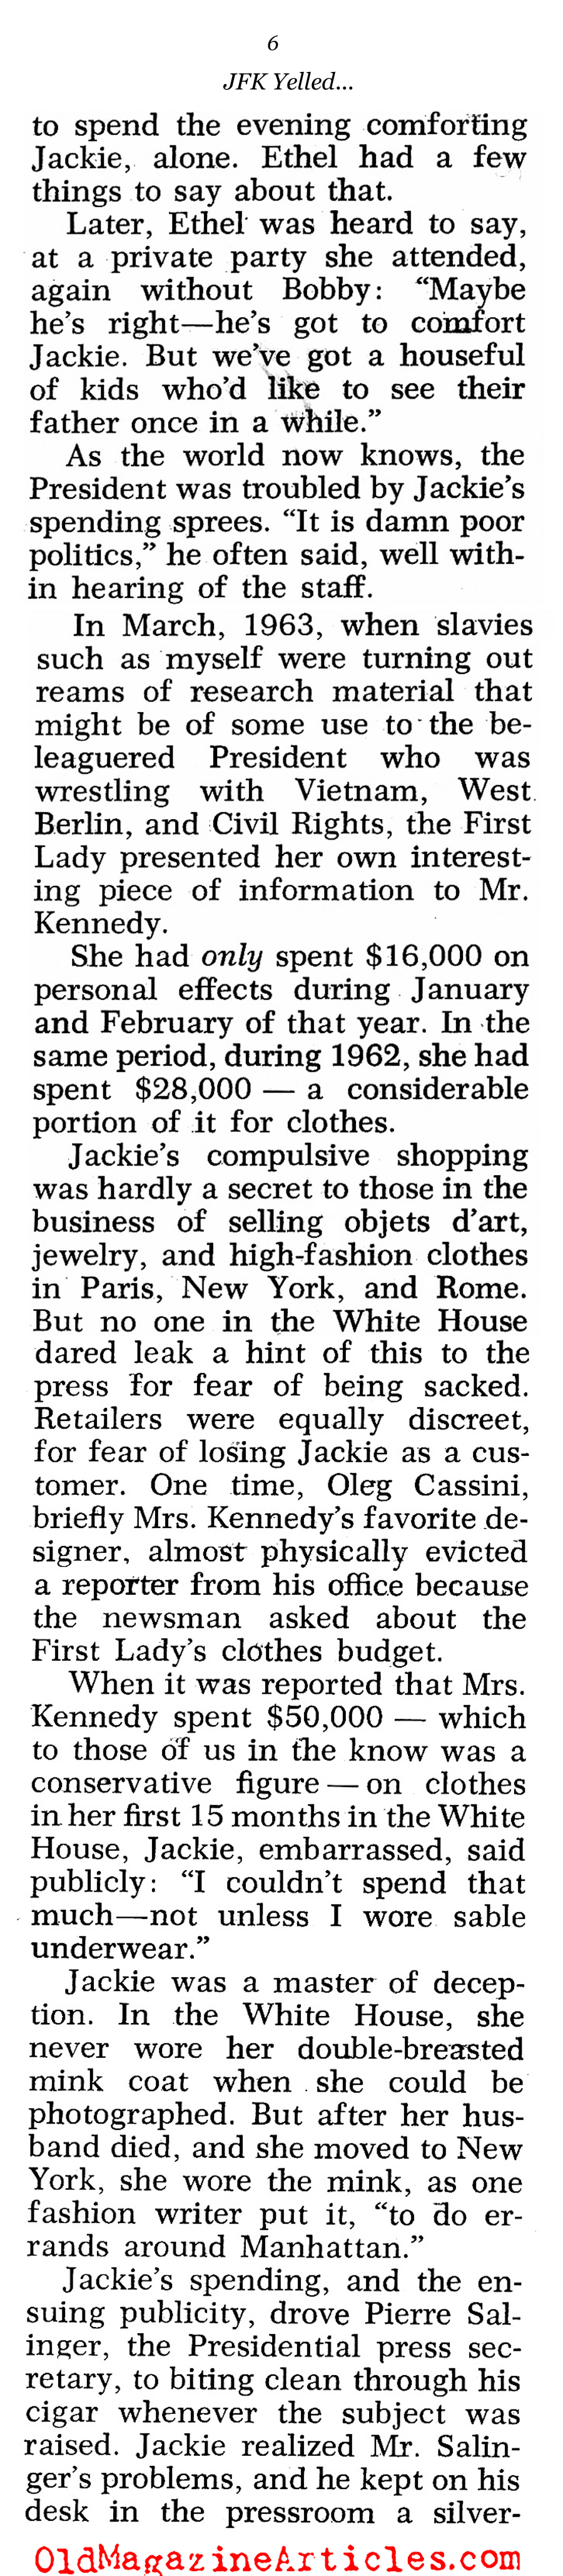 The Unknown Jackie Kennedy (Pageant Magazine, 1970)